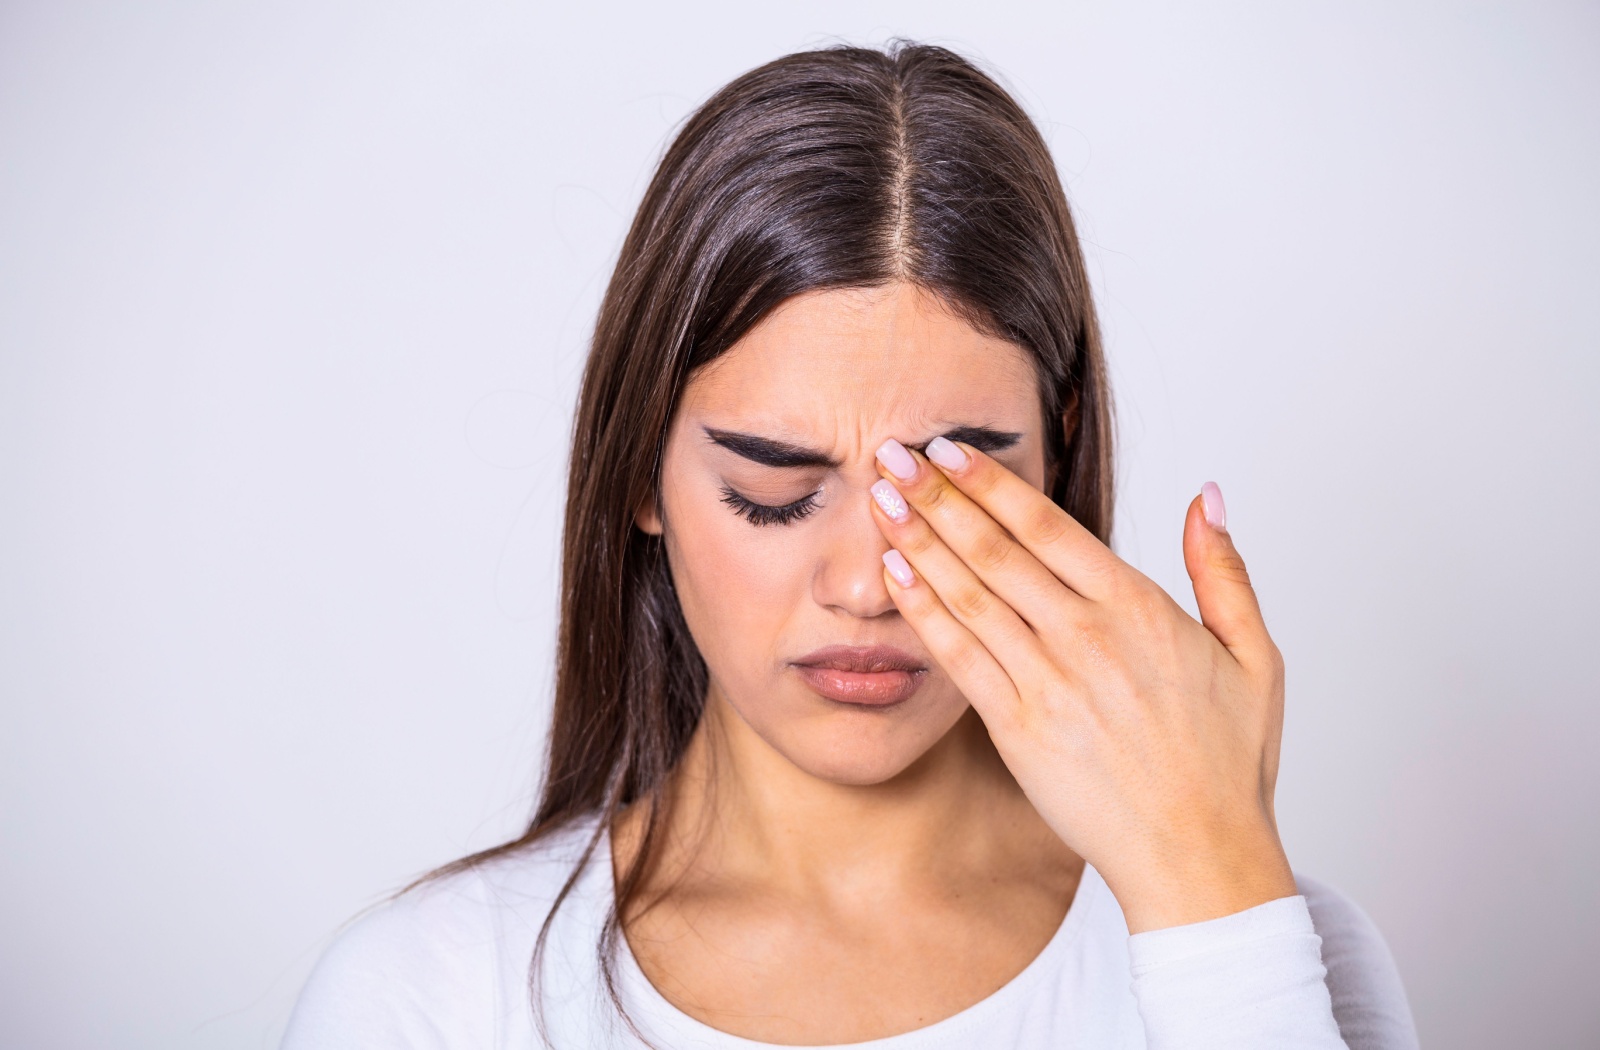 A woman rubbing her left eye with her left hand